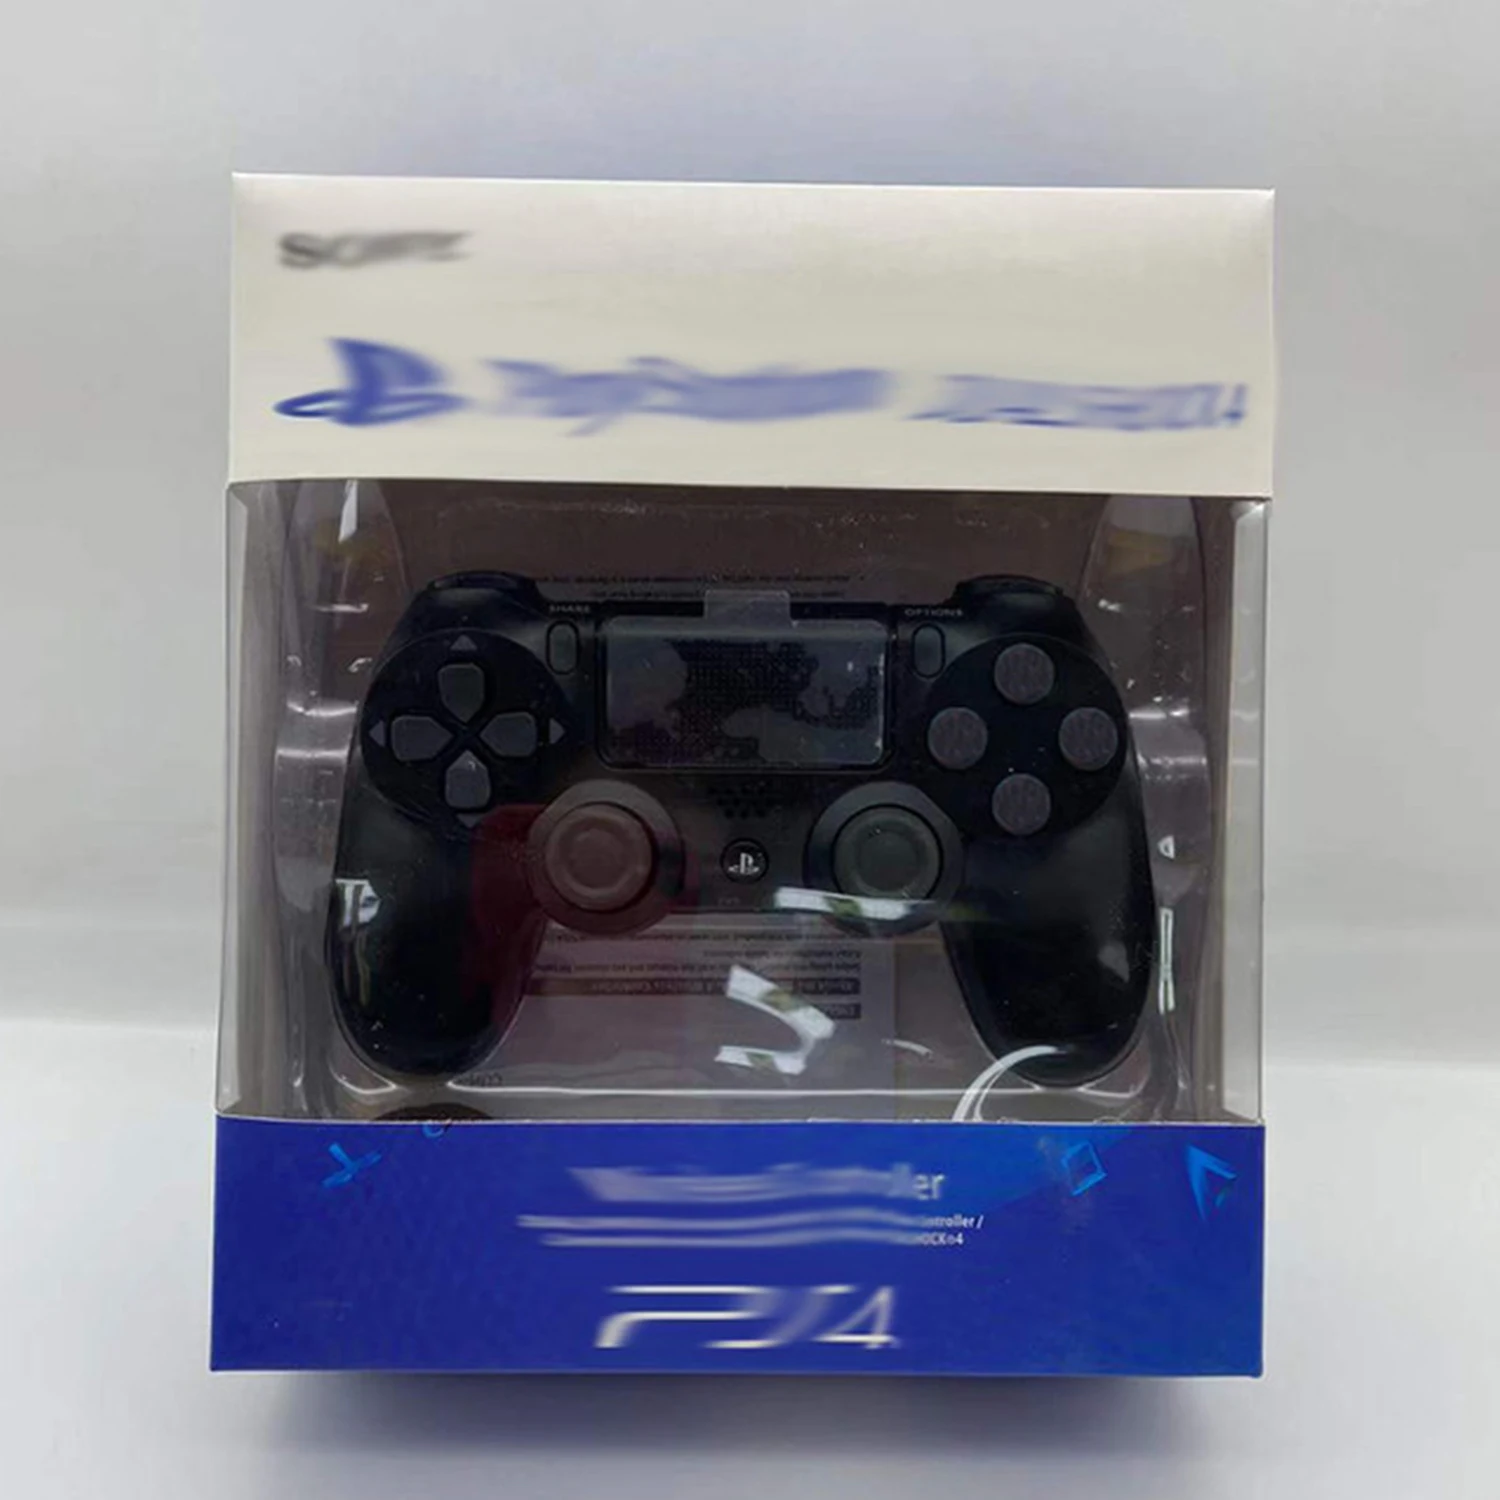 New Wireless PS4 Controller Gamepad 6-Axis Dual 4 Manette PS4 Mando Joypad Joystick For PS4Slim PS4Pro PC iPad Andriod iPhone